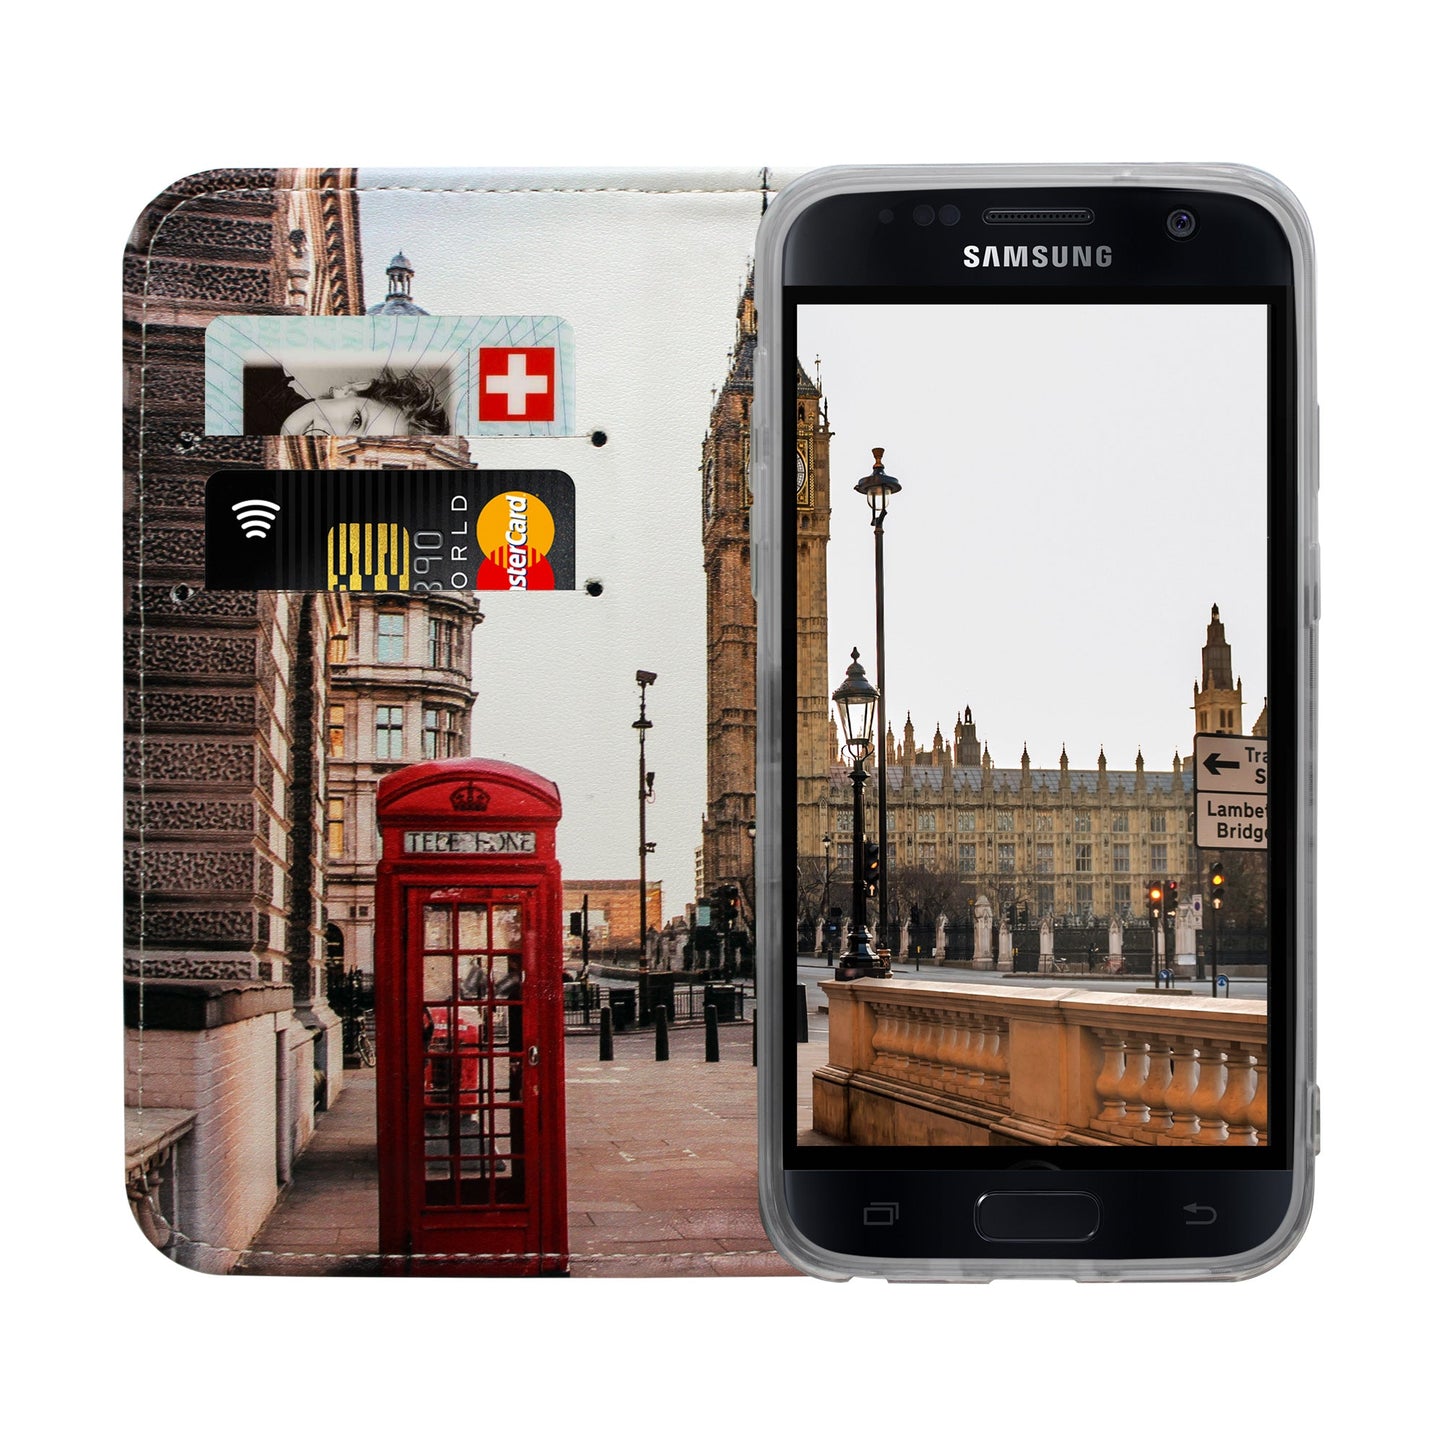 London City Panoramic Case for Samsung Galaxy S7